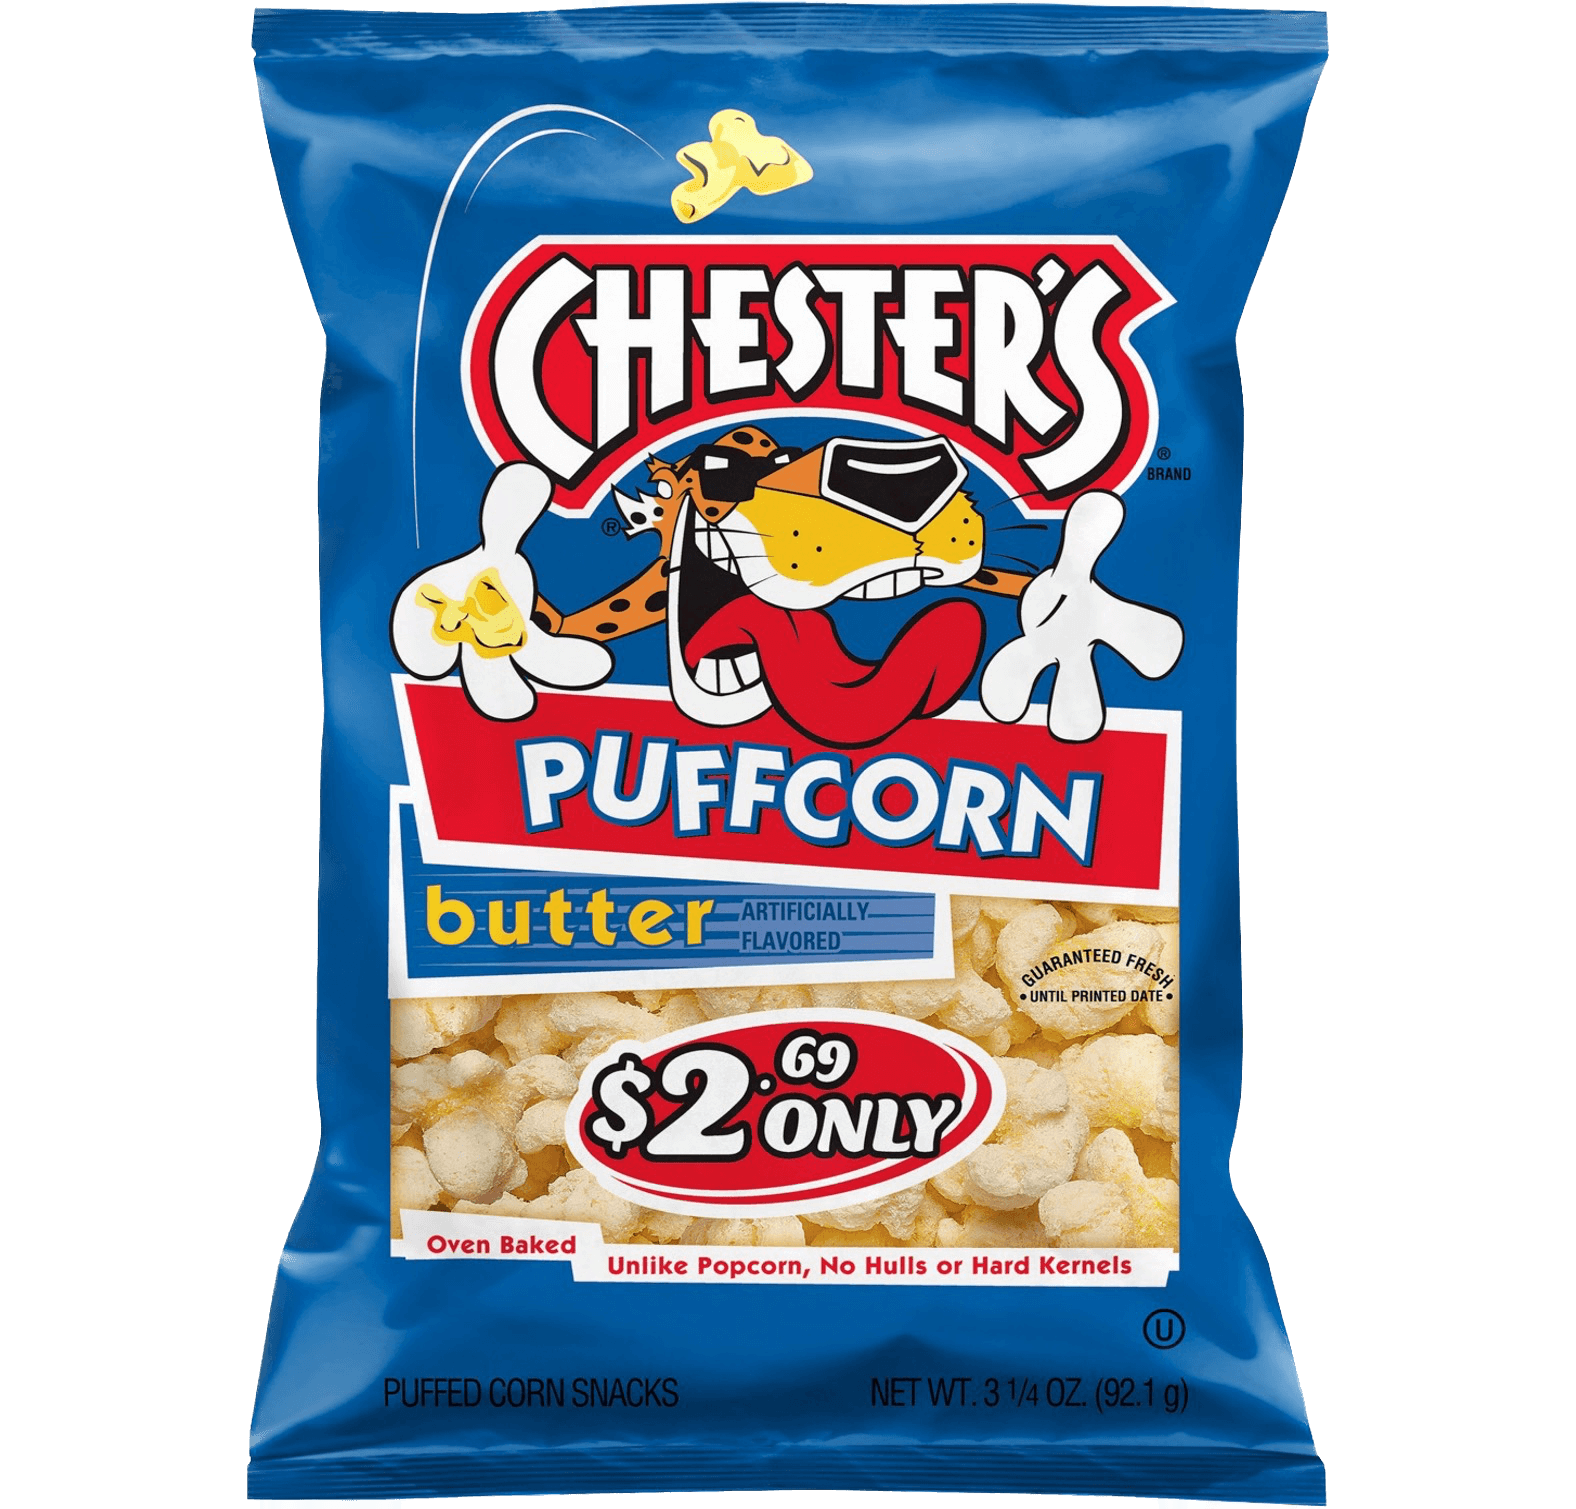 CHESTER'S® Butter Flavored Puffcorn Snacks